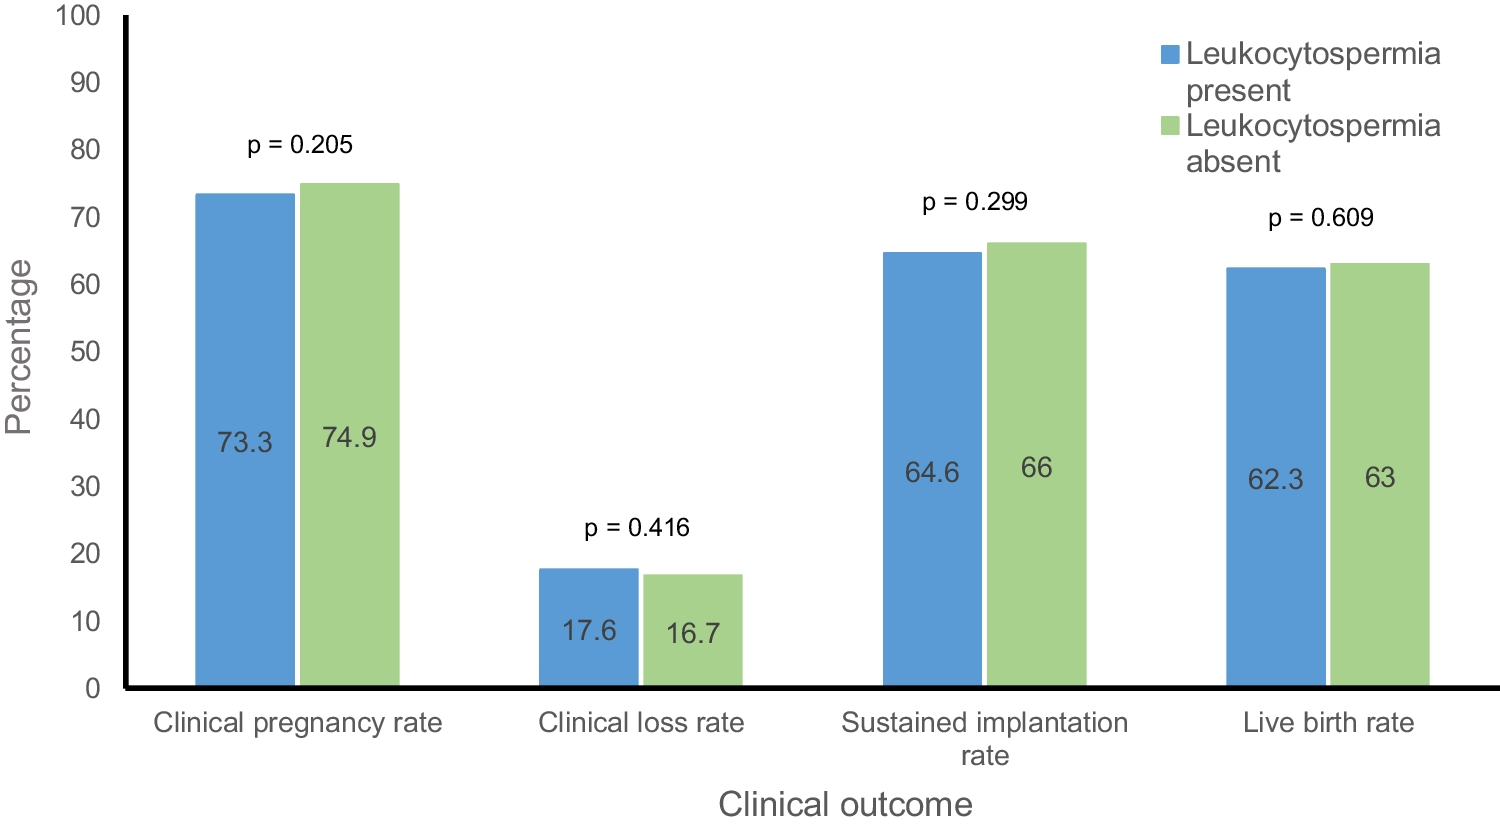 Leukocytospermia does not negatively impact outcomes in in vitro fertilization cycles with intracytoplasmic sperm injection and preimplantation genetic testing for aneuploidy: findings from 5435 cycles